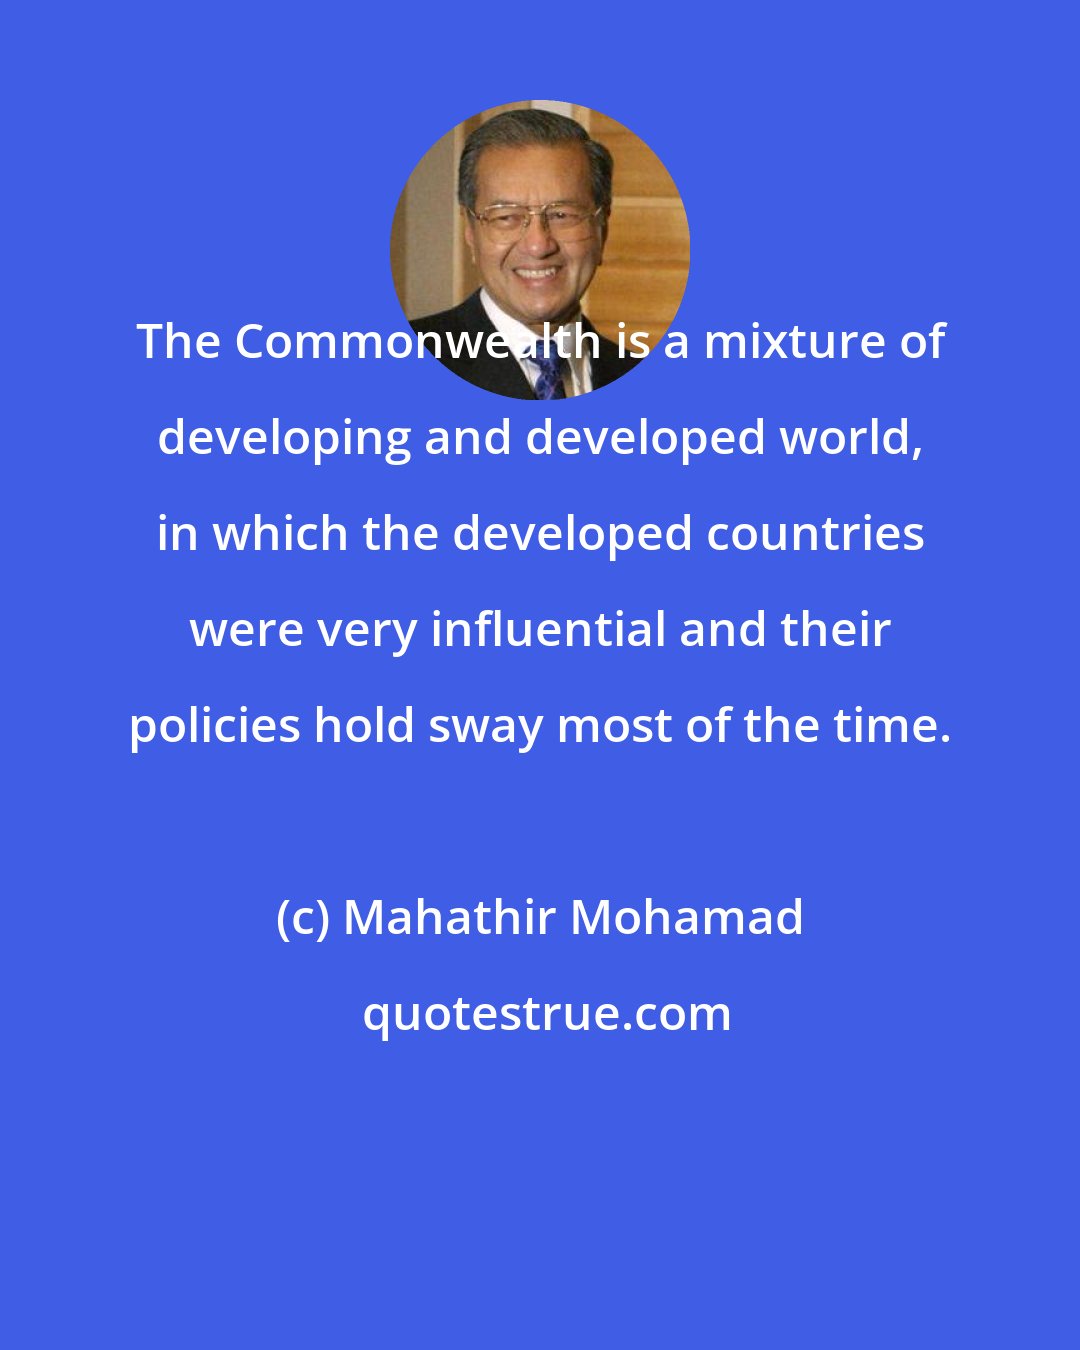 Mahathir Mohamad: The Commonwealth is a mixture of developing and developed world, in which the developed countries were very influential and their policies hold sway most of the time.